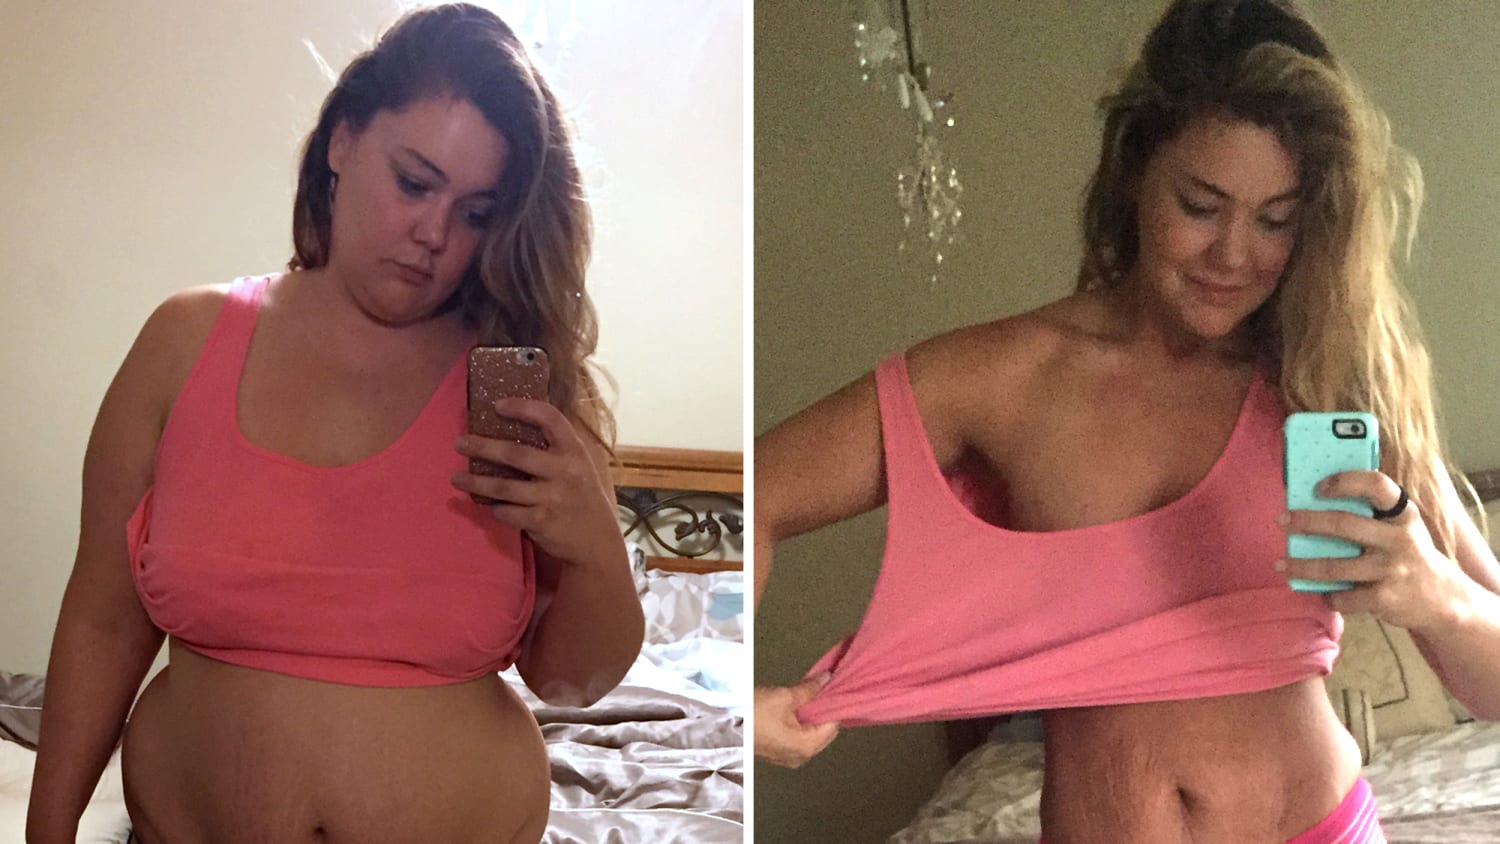 What it's like to really lose over 100 pounds.